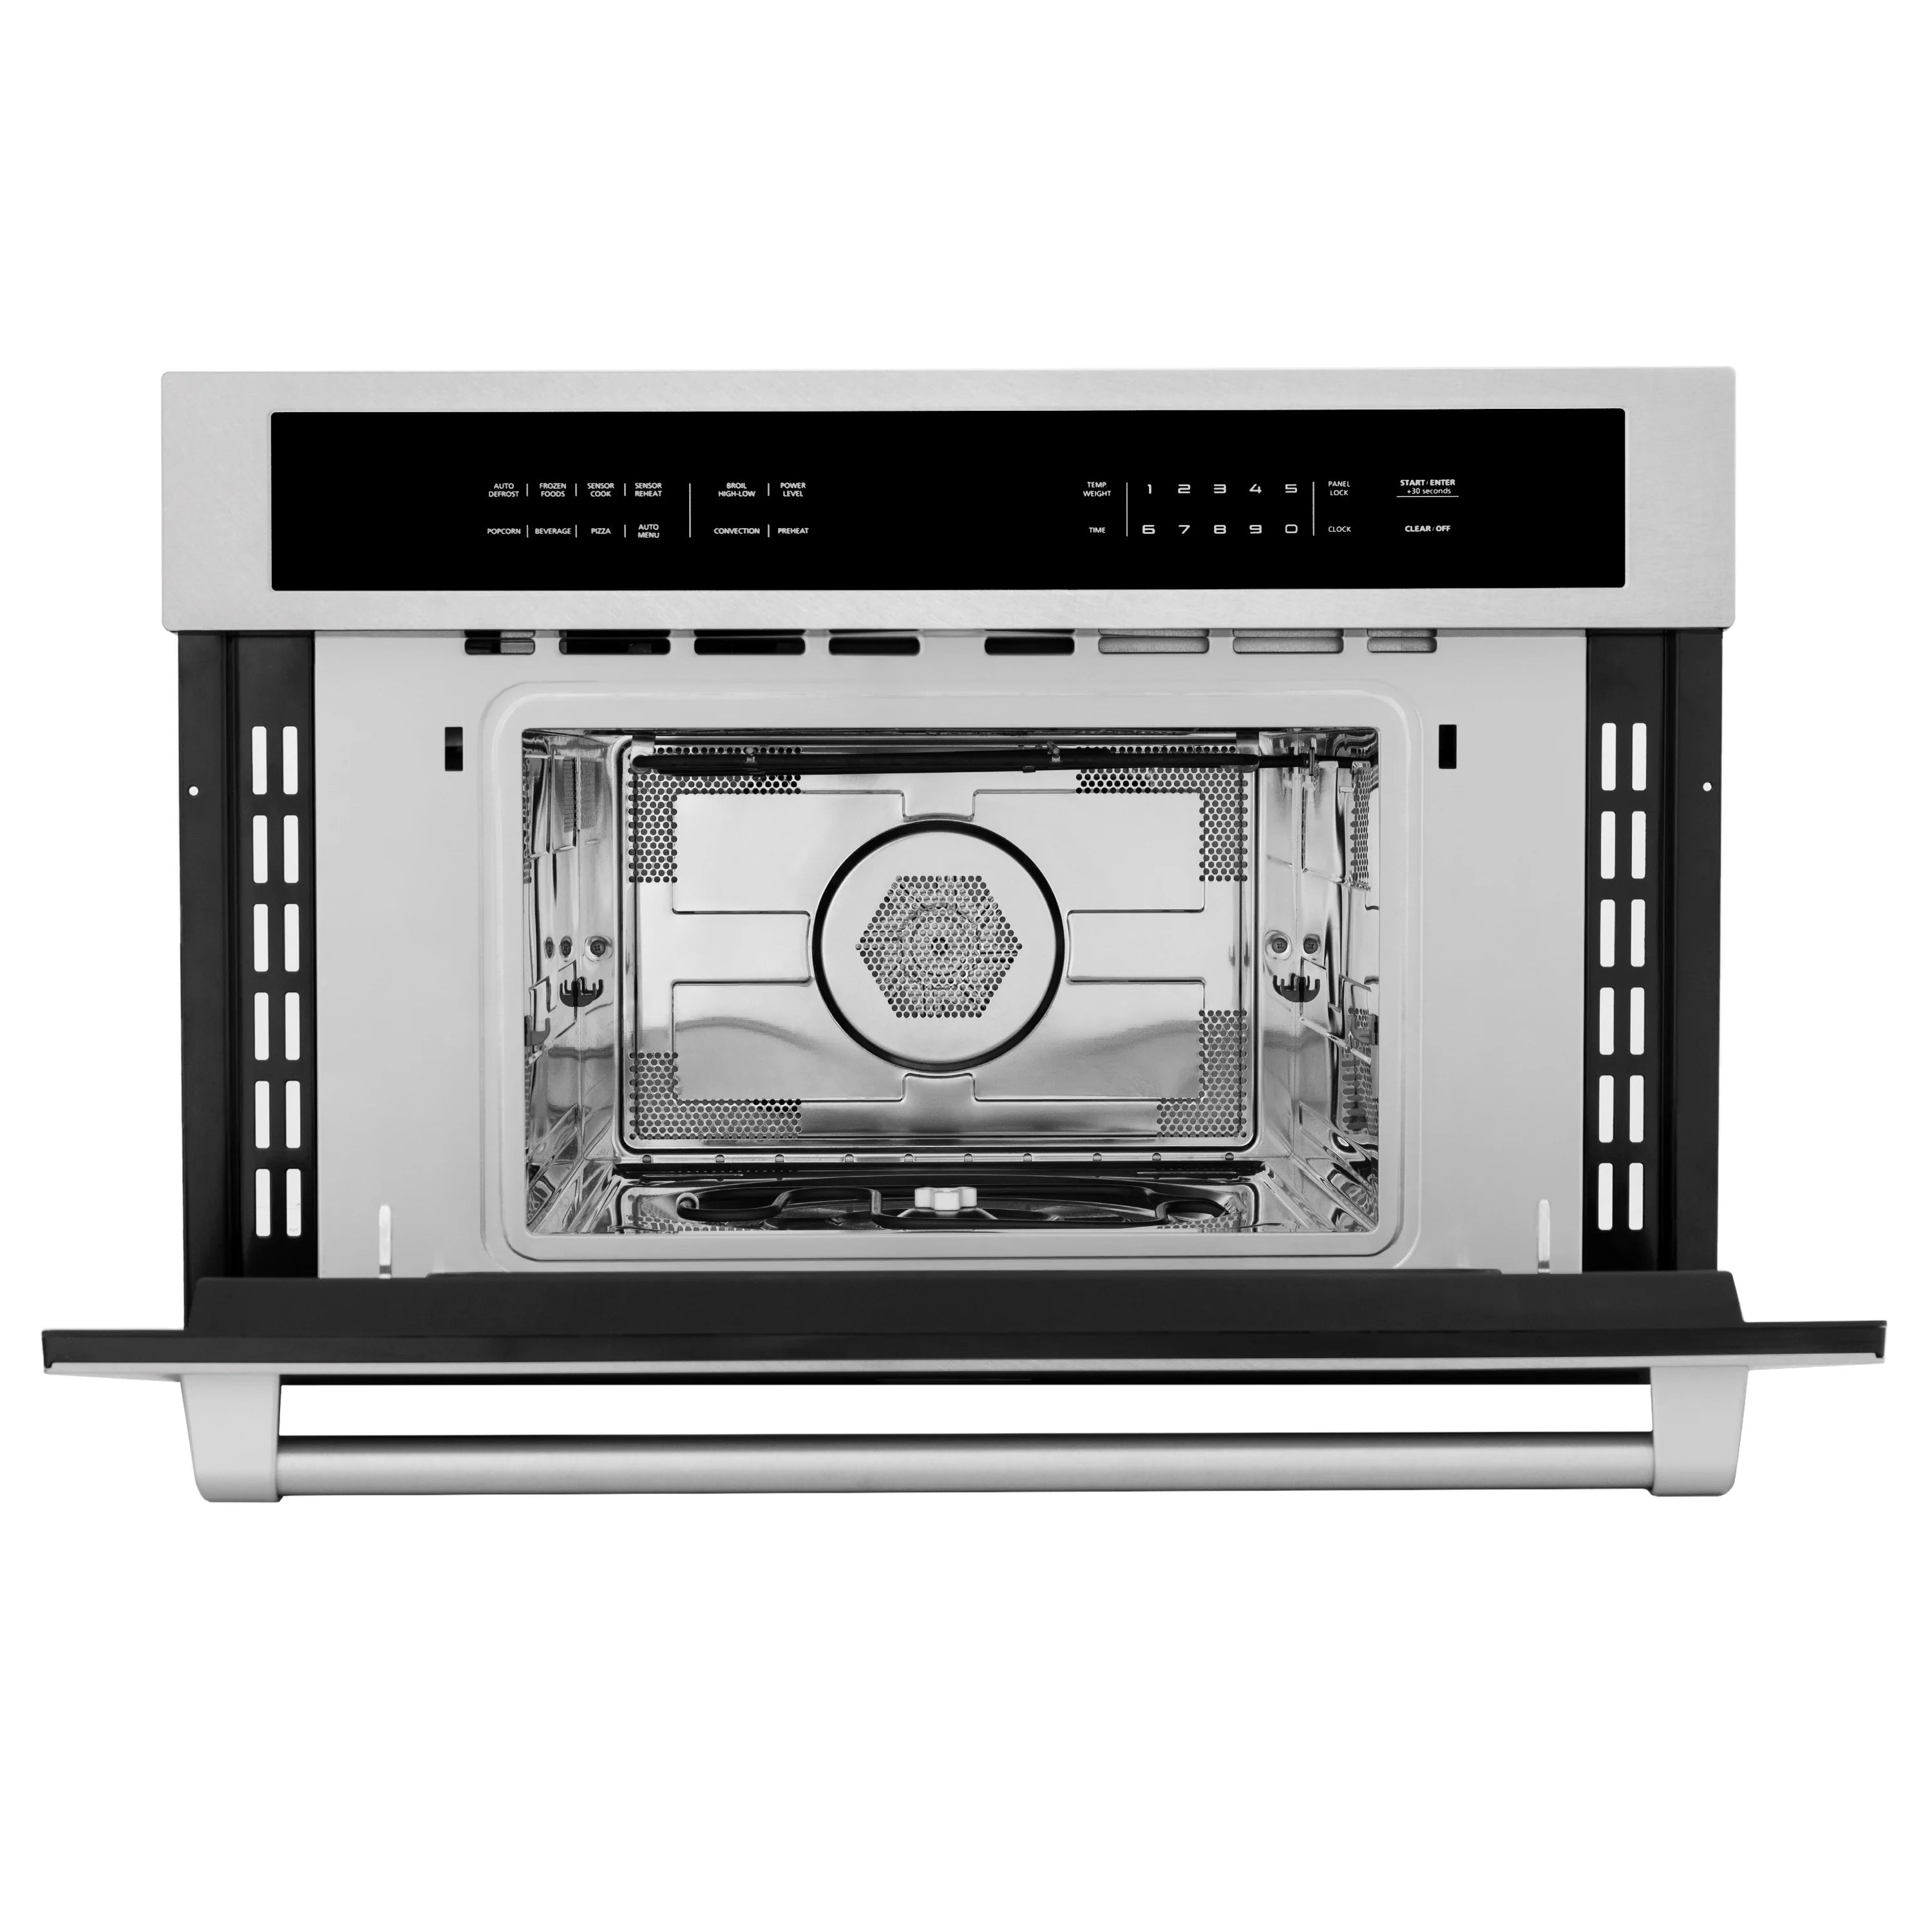 ZLINE 30 in. Built-in Convection Microwave Oven in Stainless Steel with Speed and Sensor Cooking, MWO-30